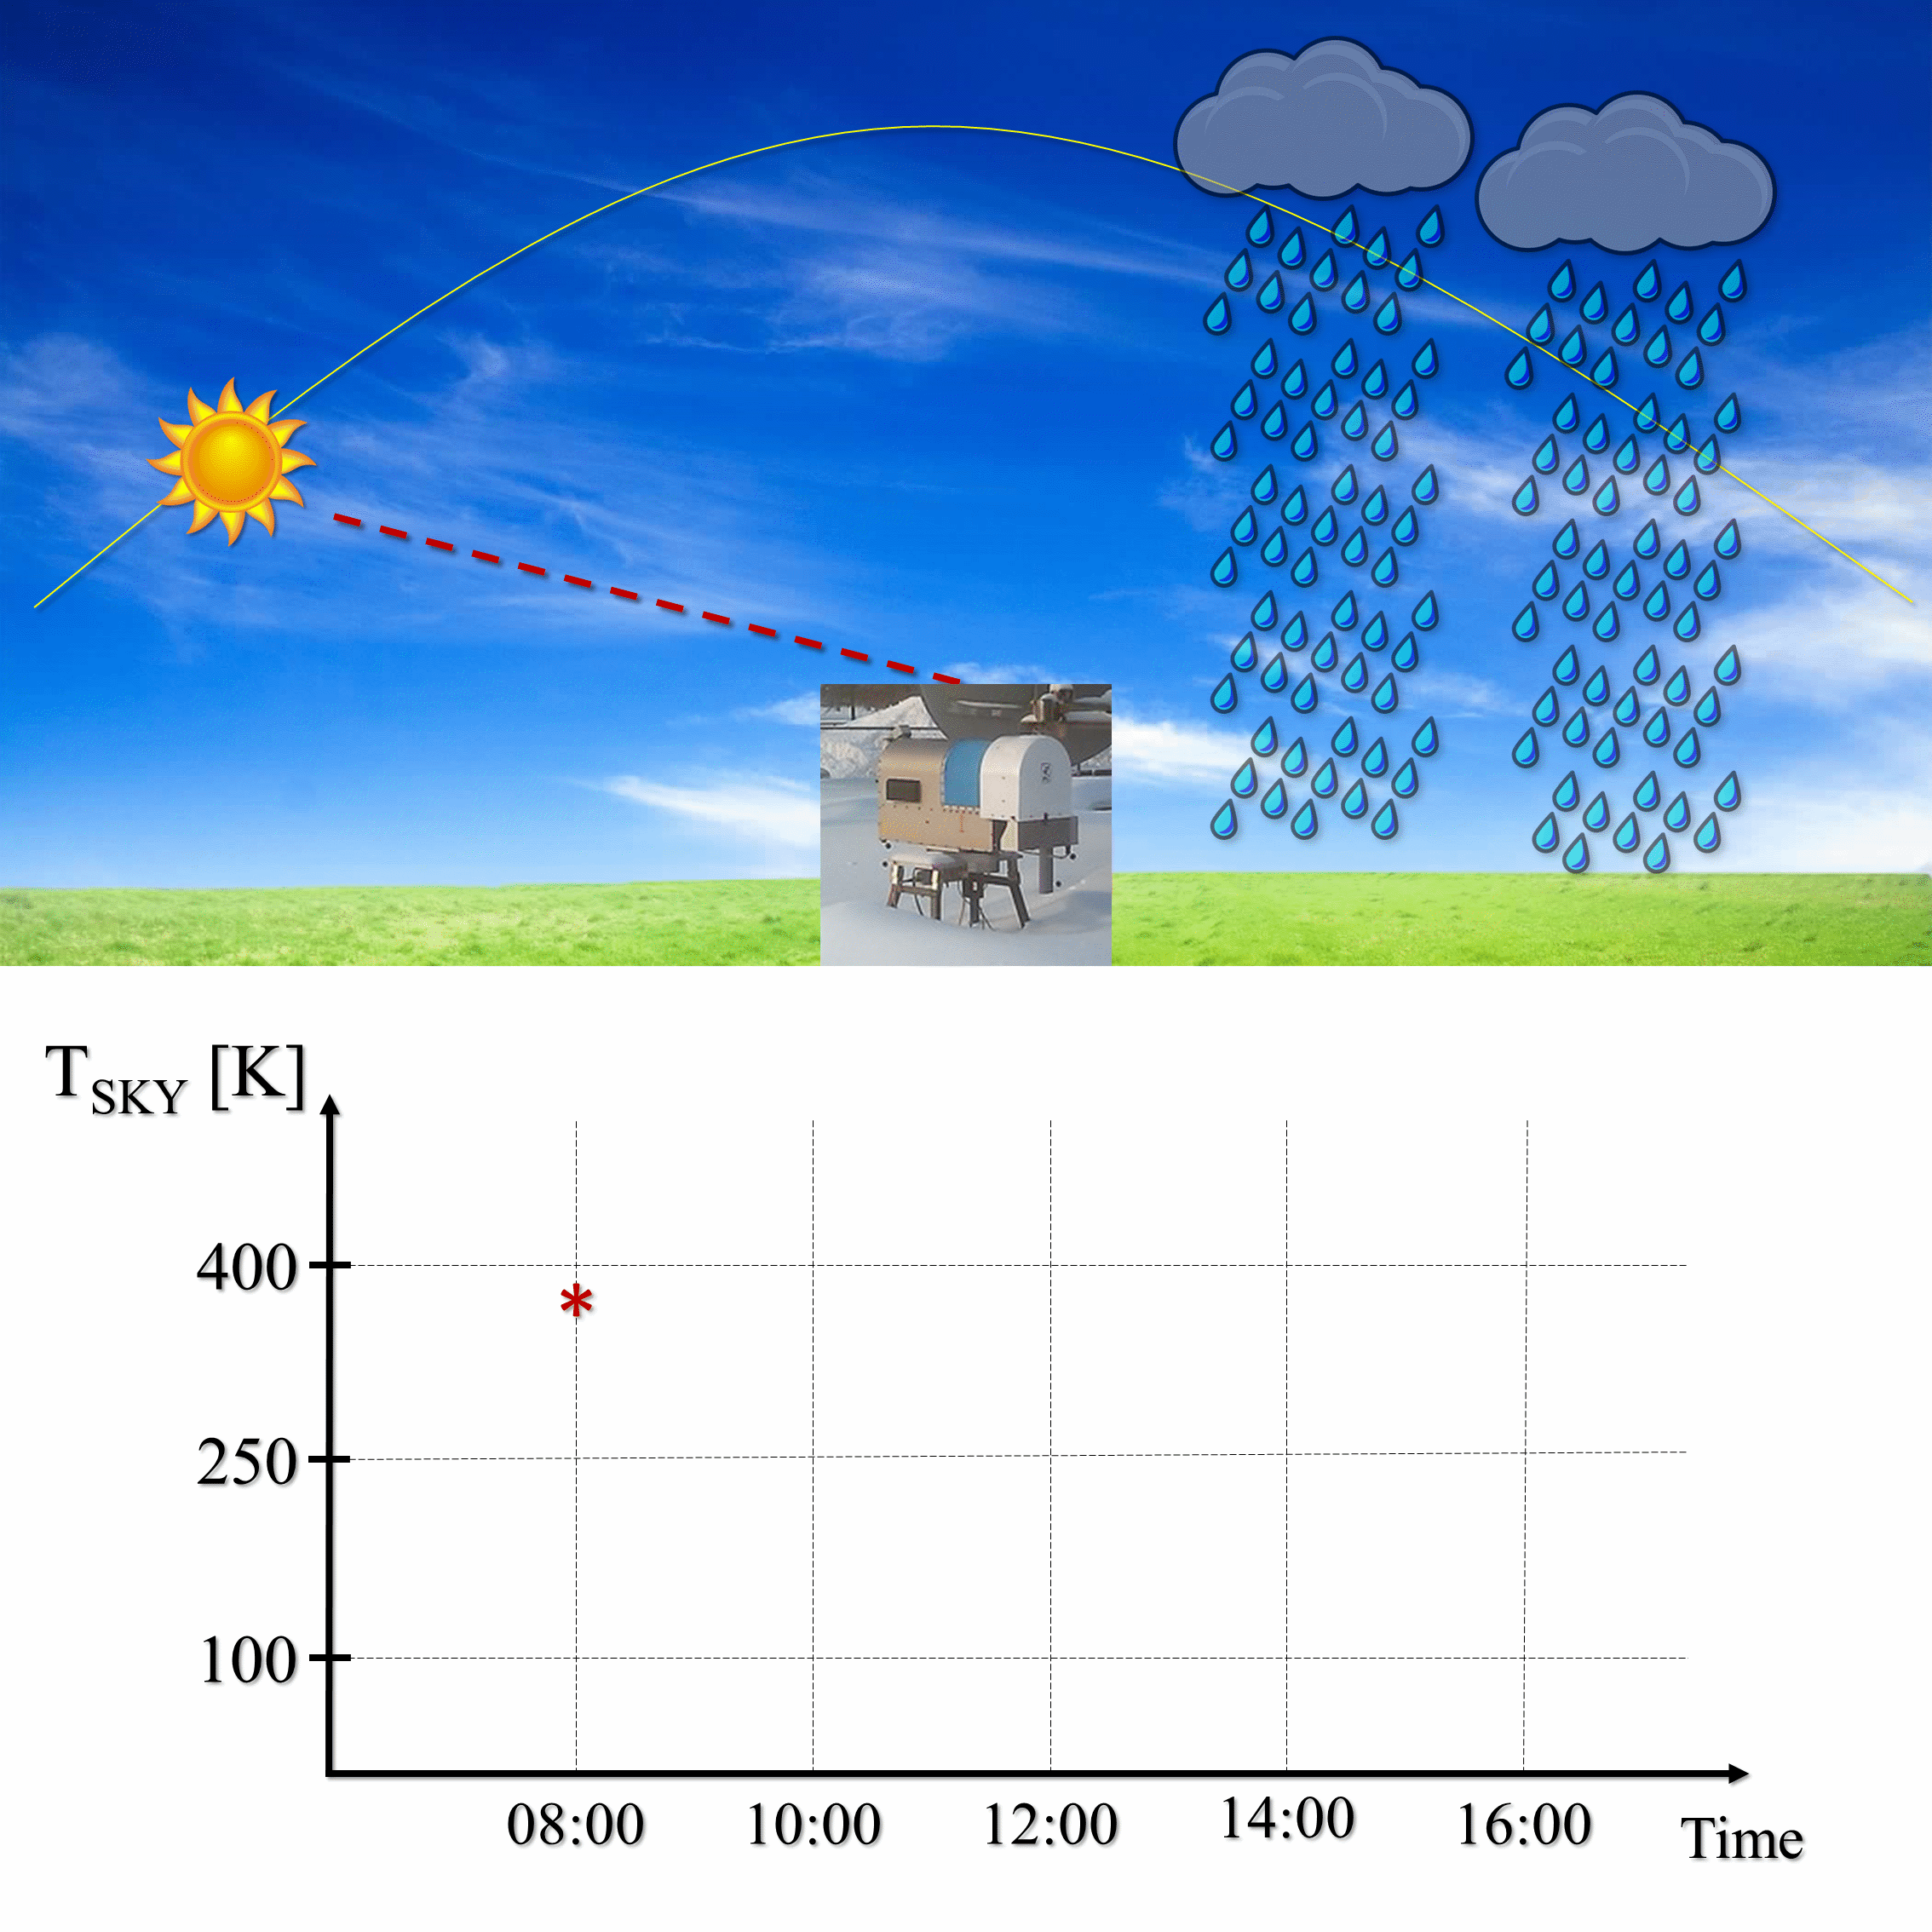 Advanced Microwave Radiometry: Sun-Tracking Technique for Three-Dimensional Atmospheric Channel Characterization up to W-band in All-Weather Conditions